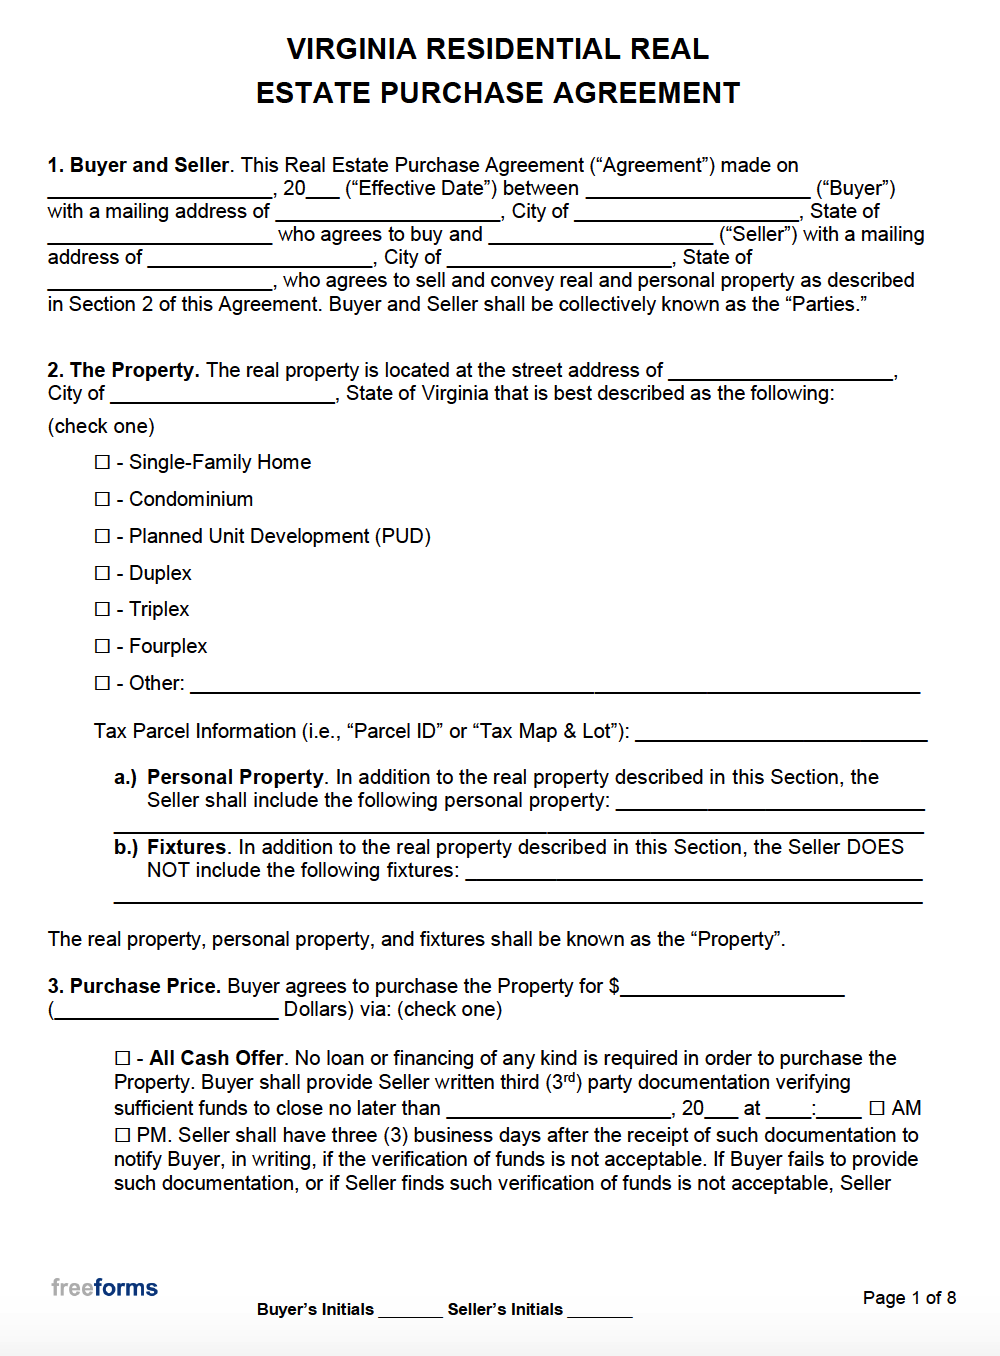 Free Virginia Real Estate Purchase Agreement Template  PDF  WORD Inside home purchase agreement template